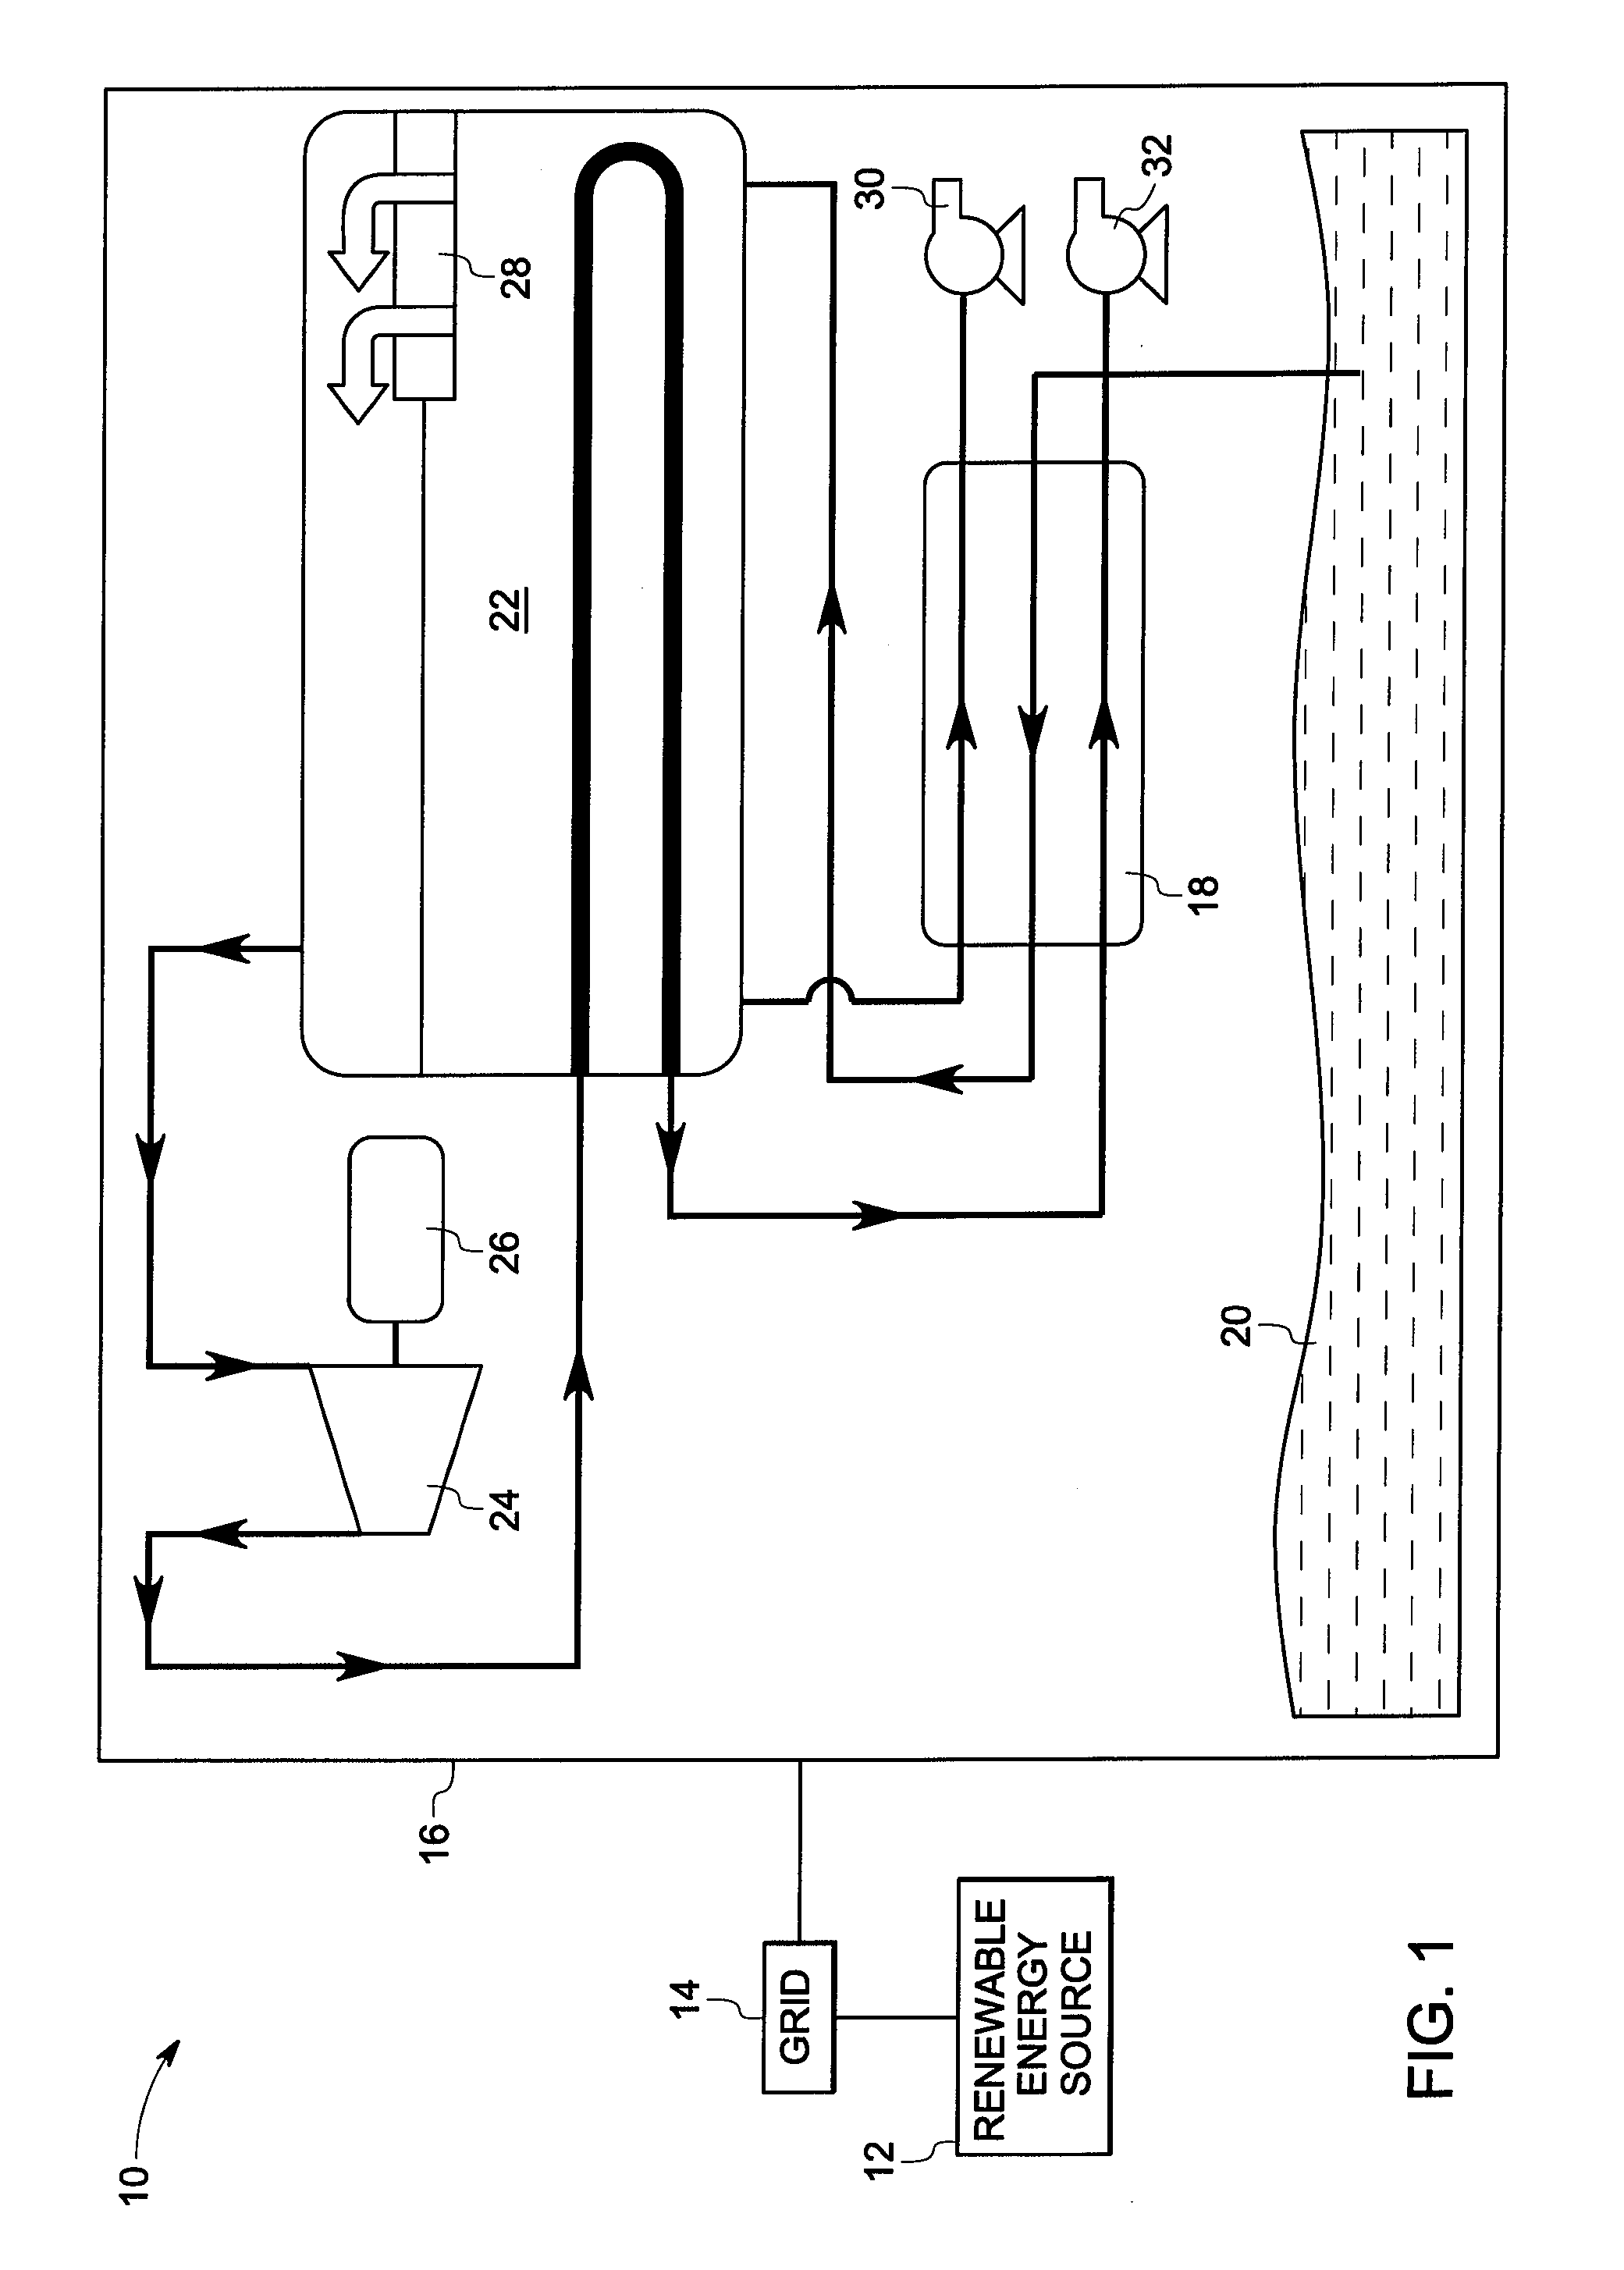 Hybrid water desalination system and method of operation